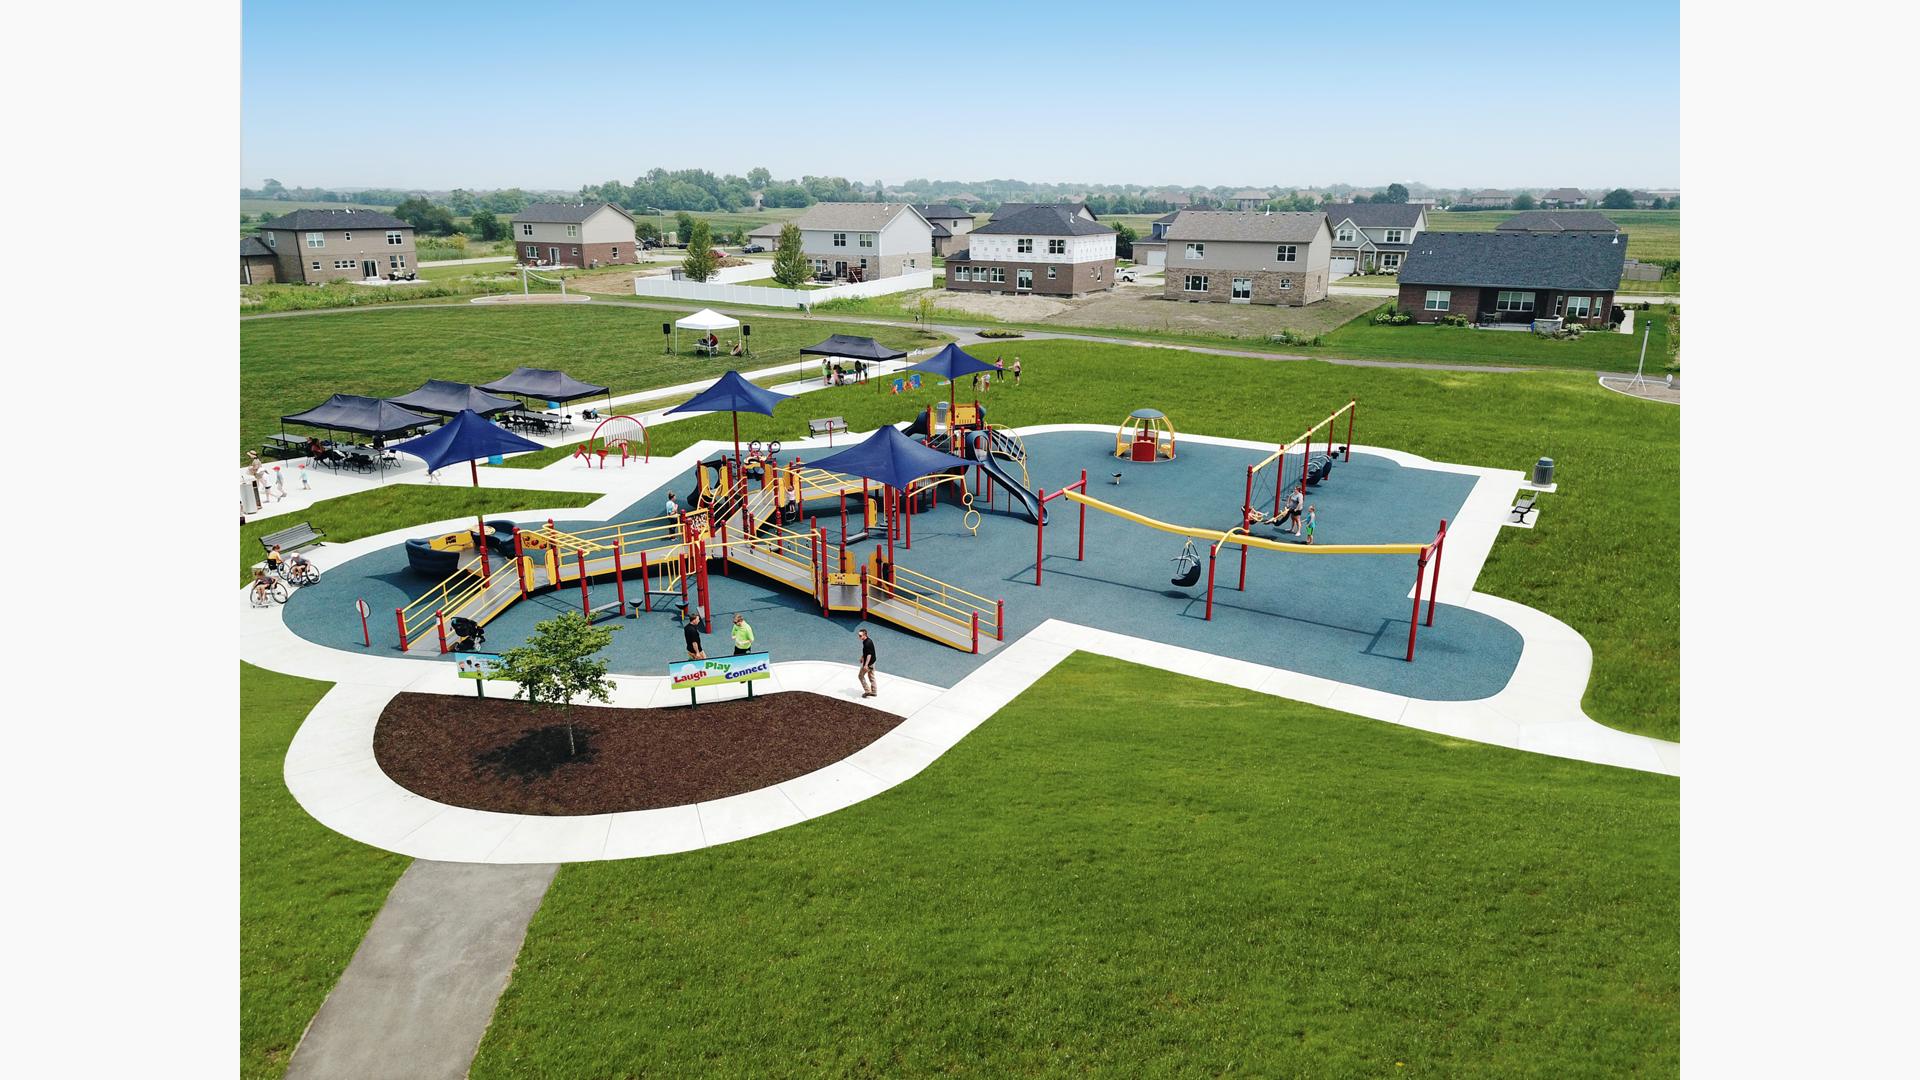 Elevated view of a neighborhood park inclusive play area. The playground is connected by accessible ramps and bridges surrounded by a swing set, zip line, and manual carousel. 